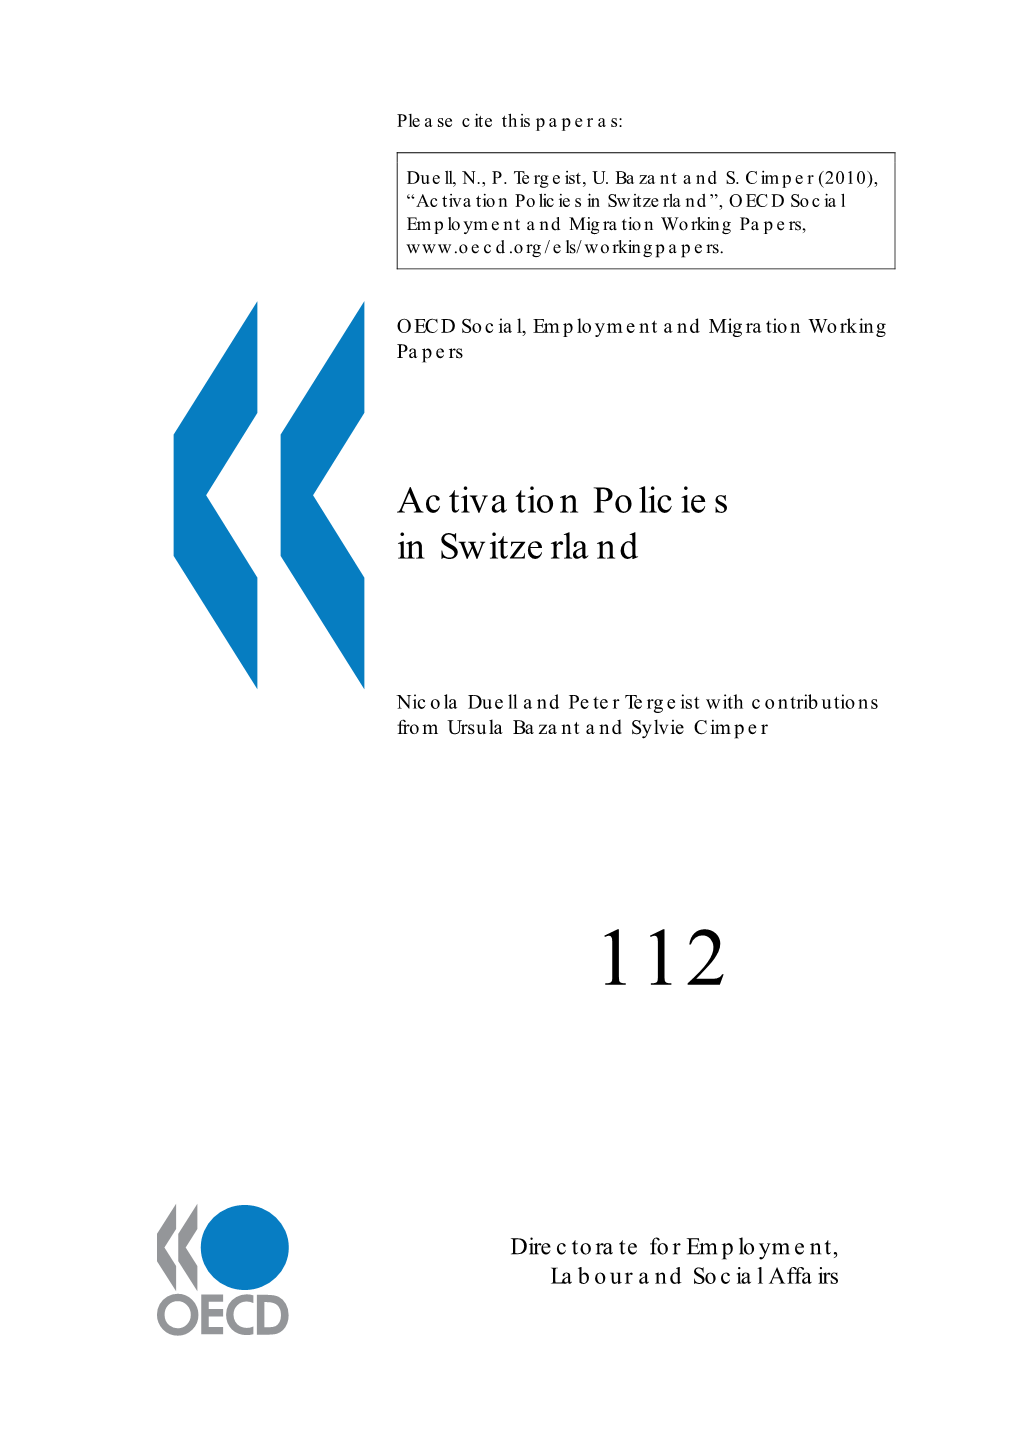 Activation Policies in Switzerland”, OECD Social Employment and Migration Working Papers